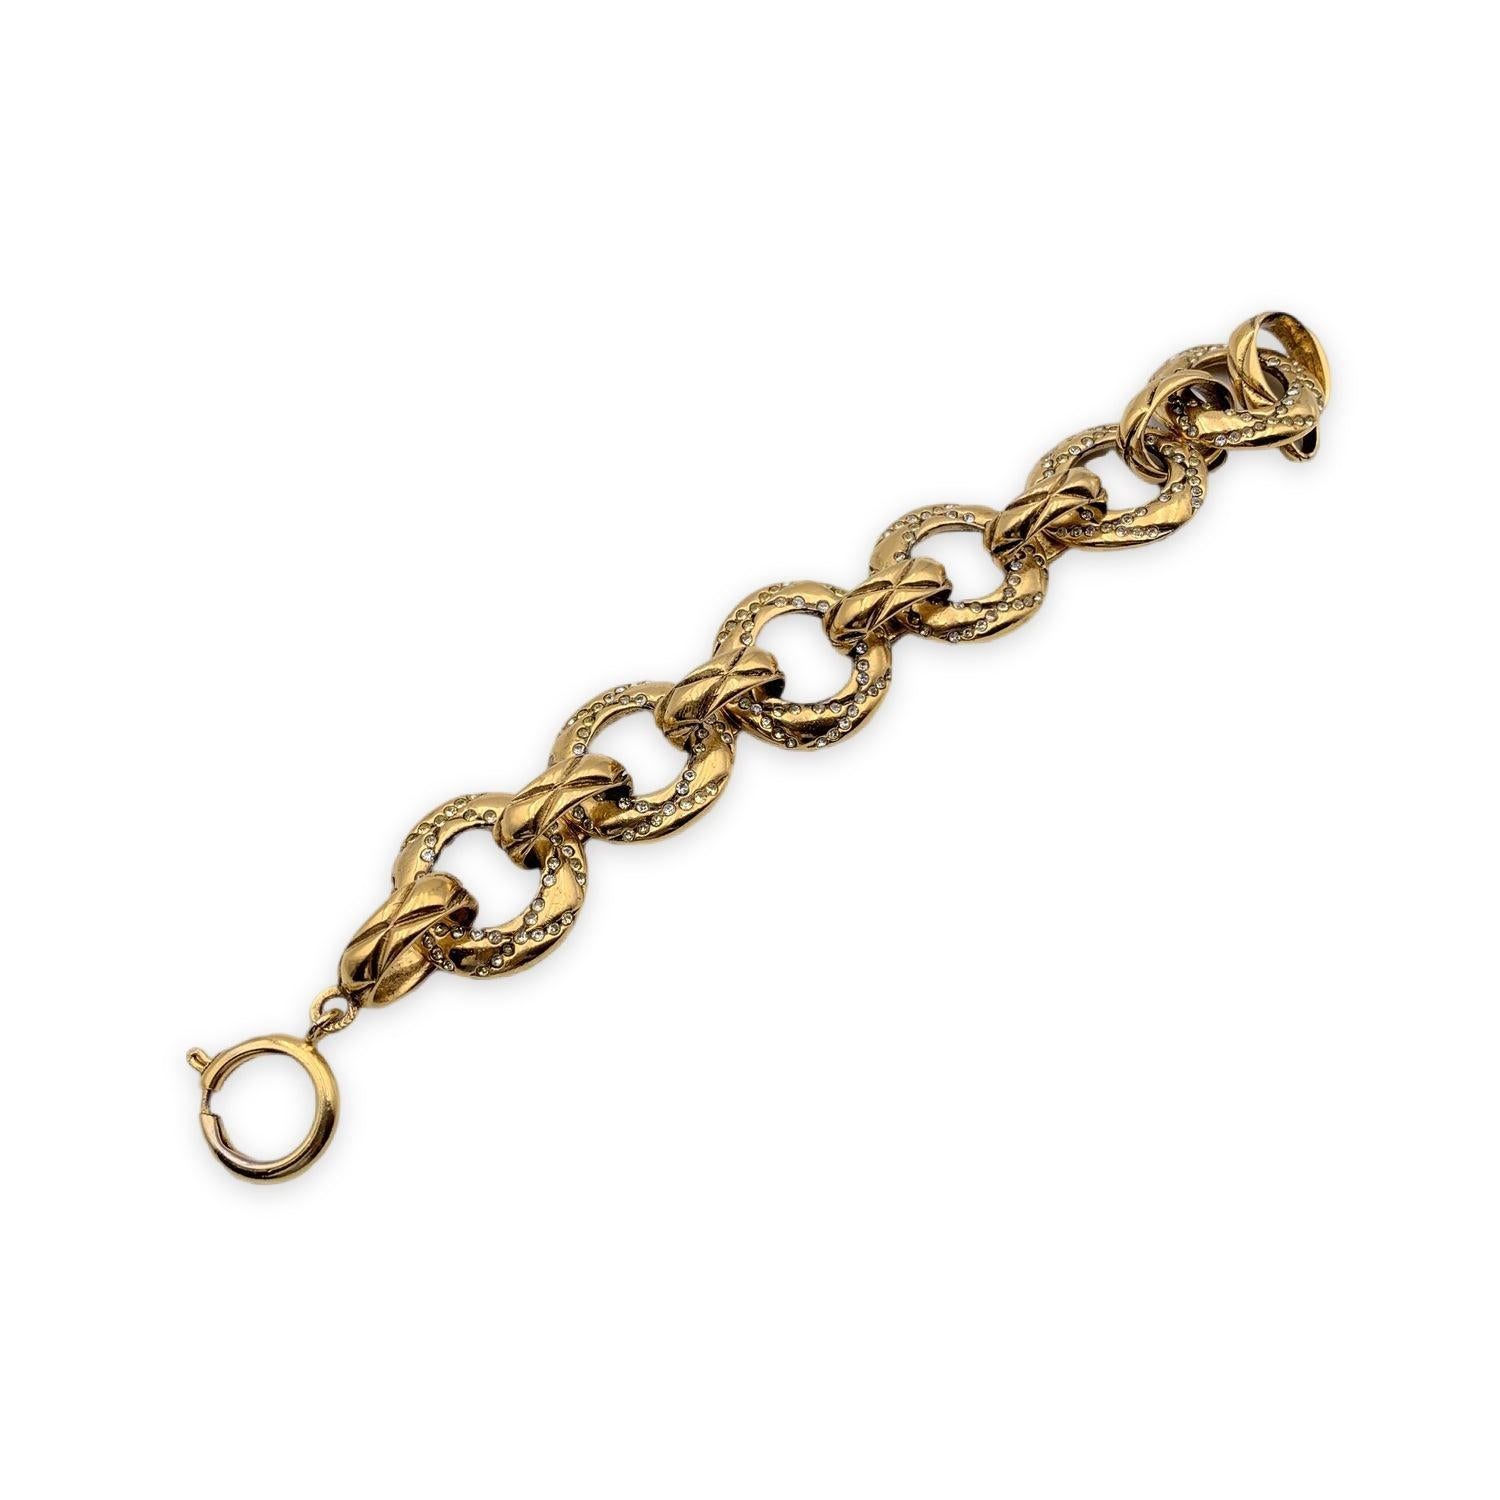 Beautiful bracelet by CHANEL. Round Chain link with quilted pattern. Crystals embellishment. Spring ring closure. 'CHANEL 2 CC 3 Made in France' oval hallmark at the end of the bracelet. Total length:7.5 inches - 19 cm Condition A - EXCELLENT Gently